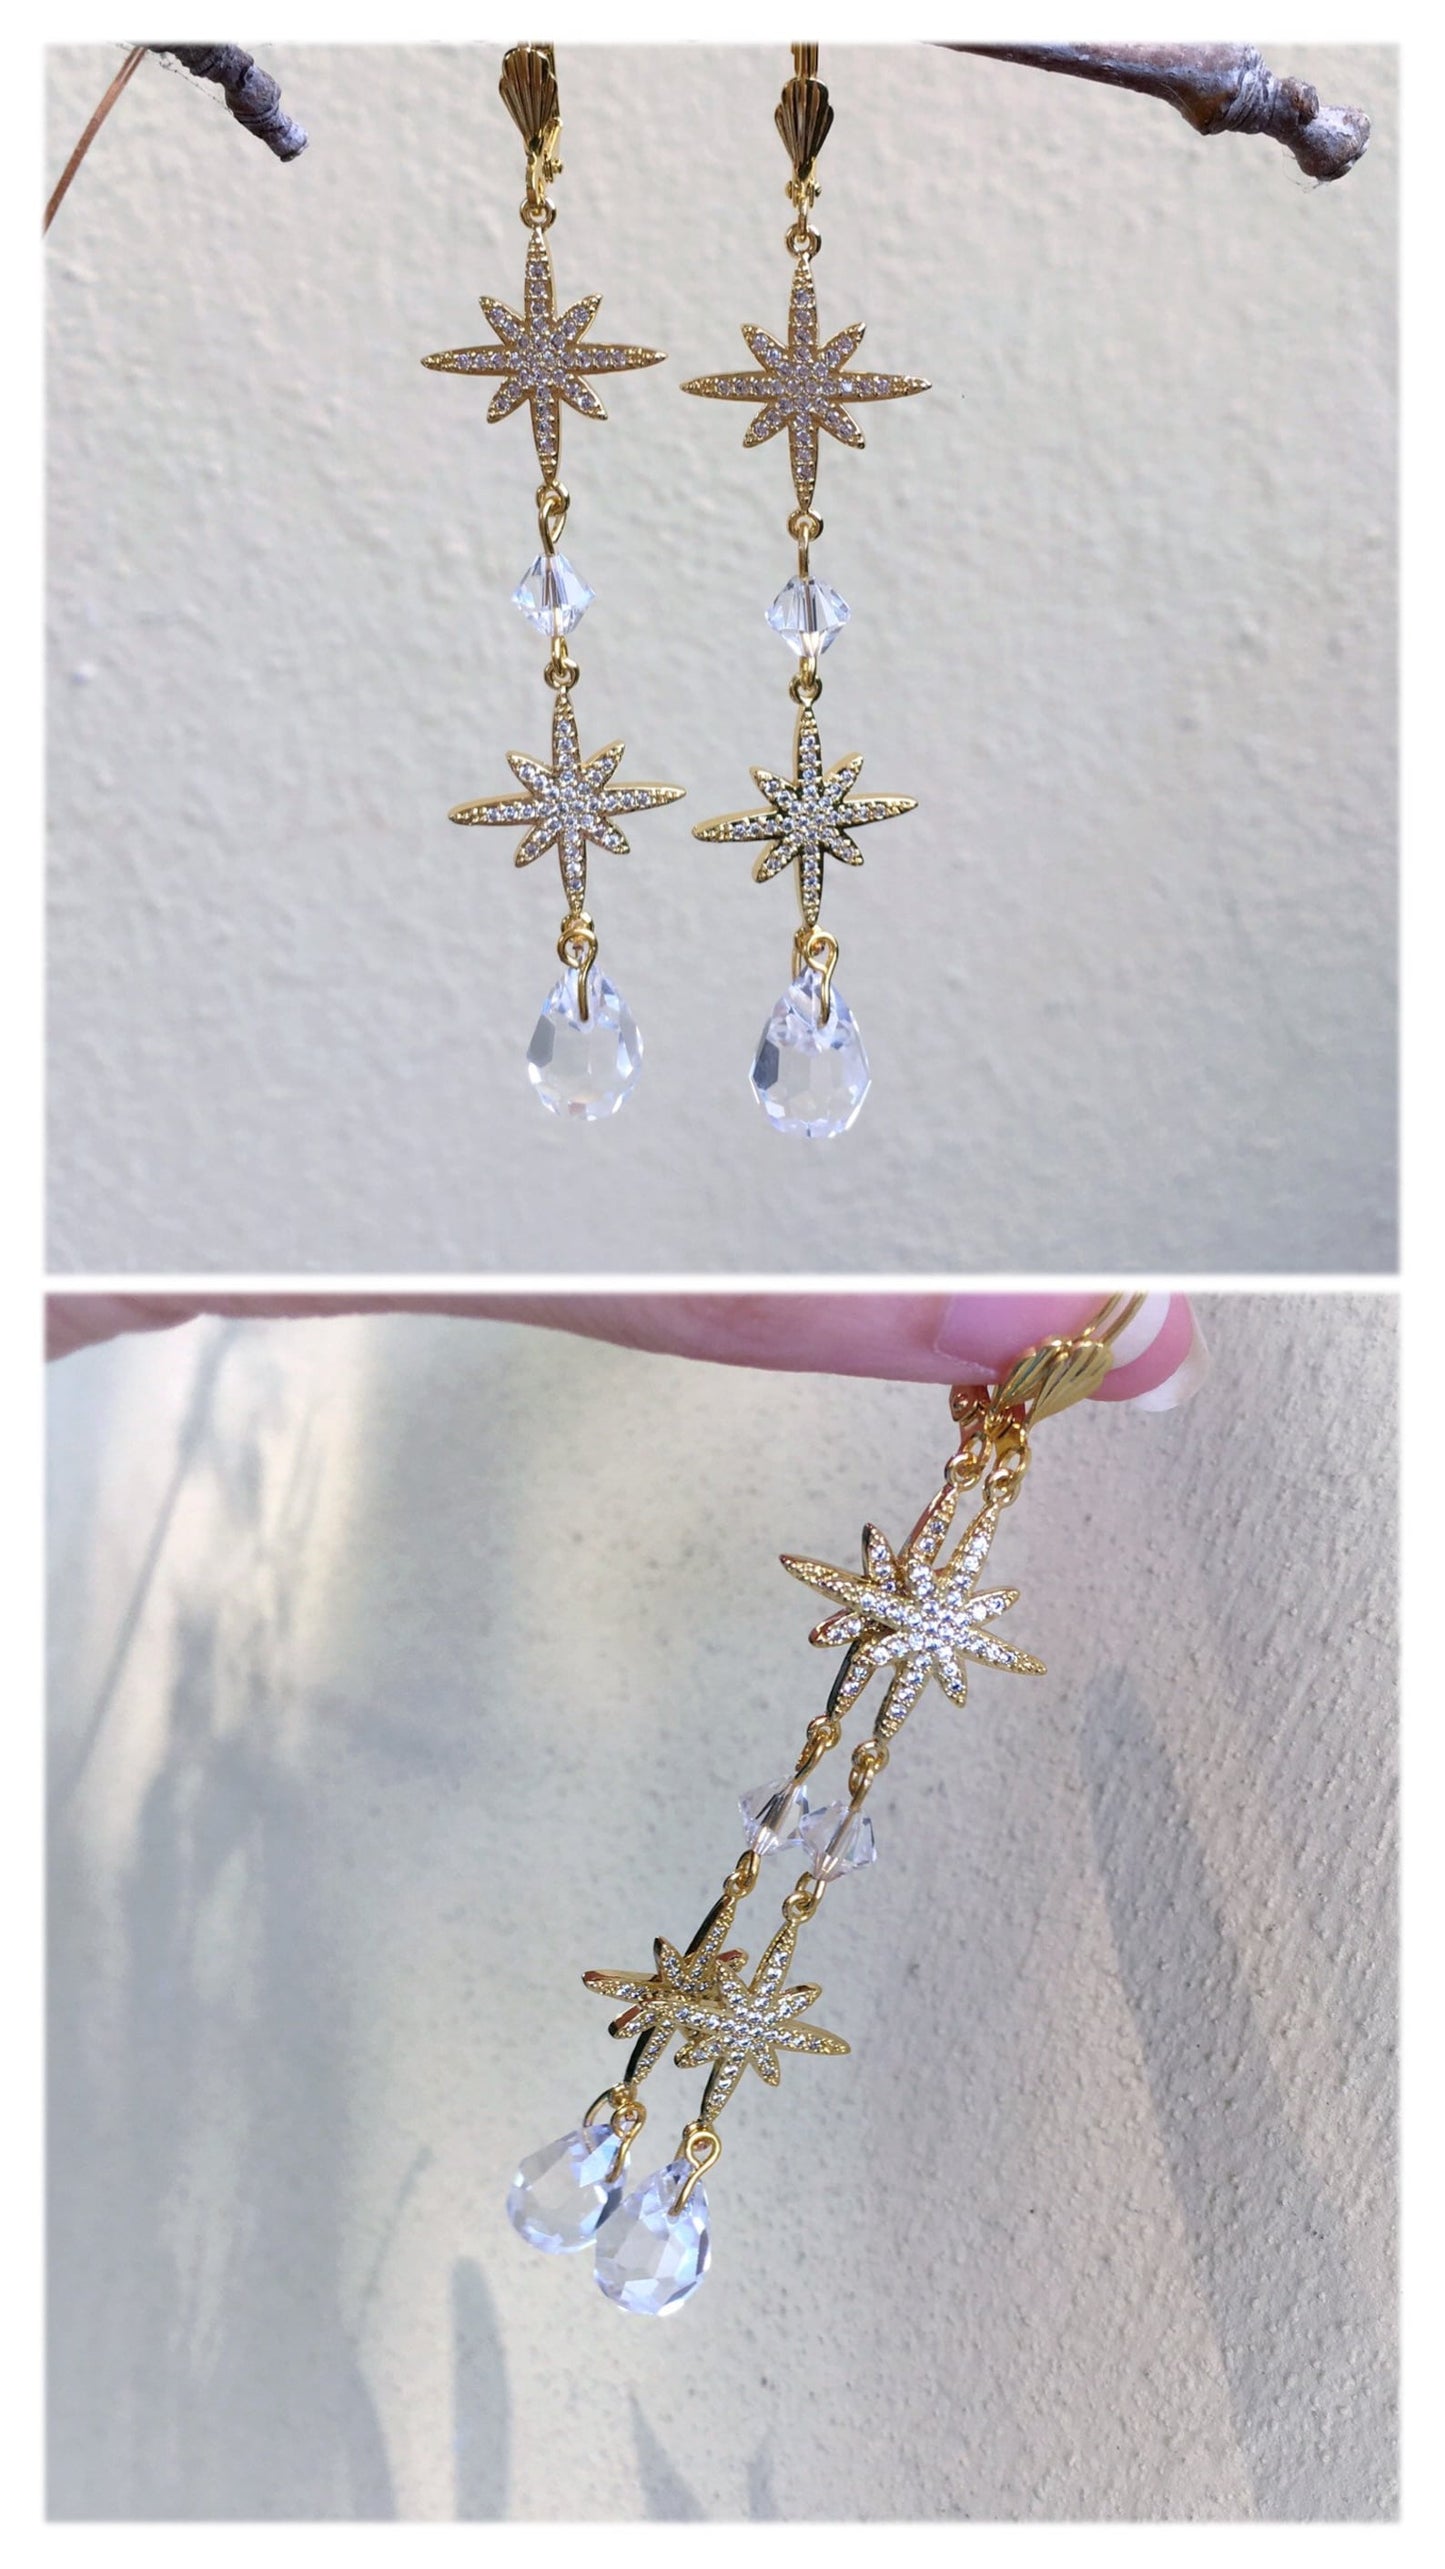 Christine Phantom of the Opera Earrings - North Star with Preciosa crystals - Think of me